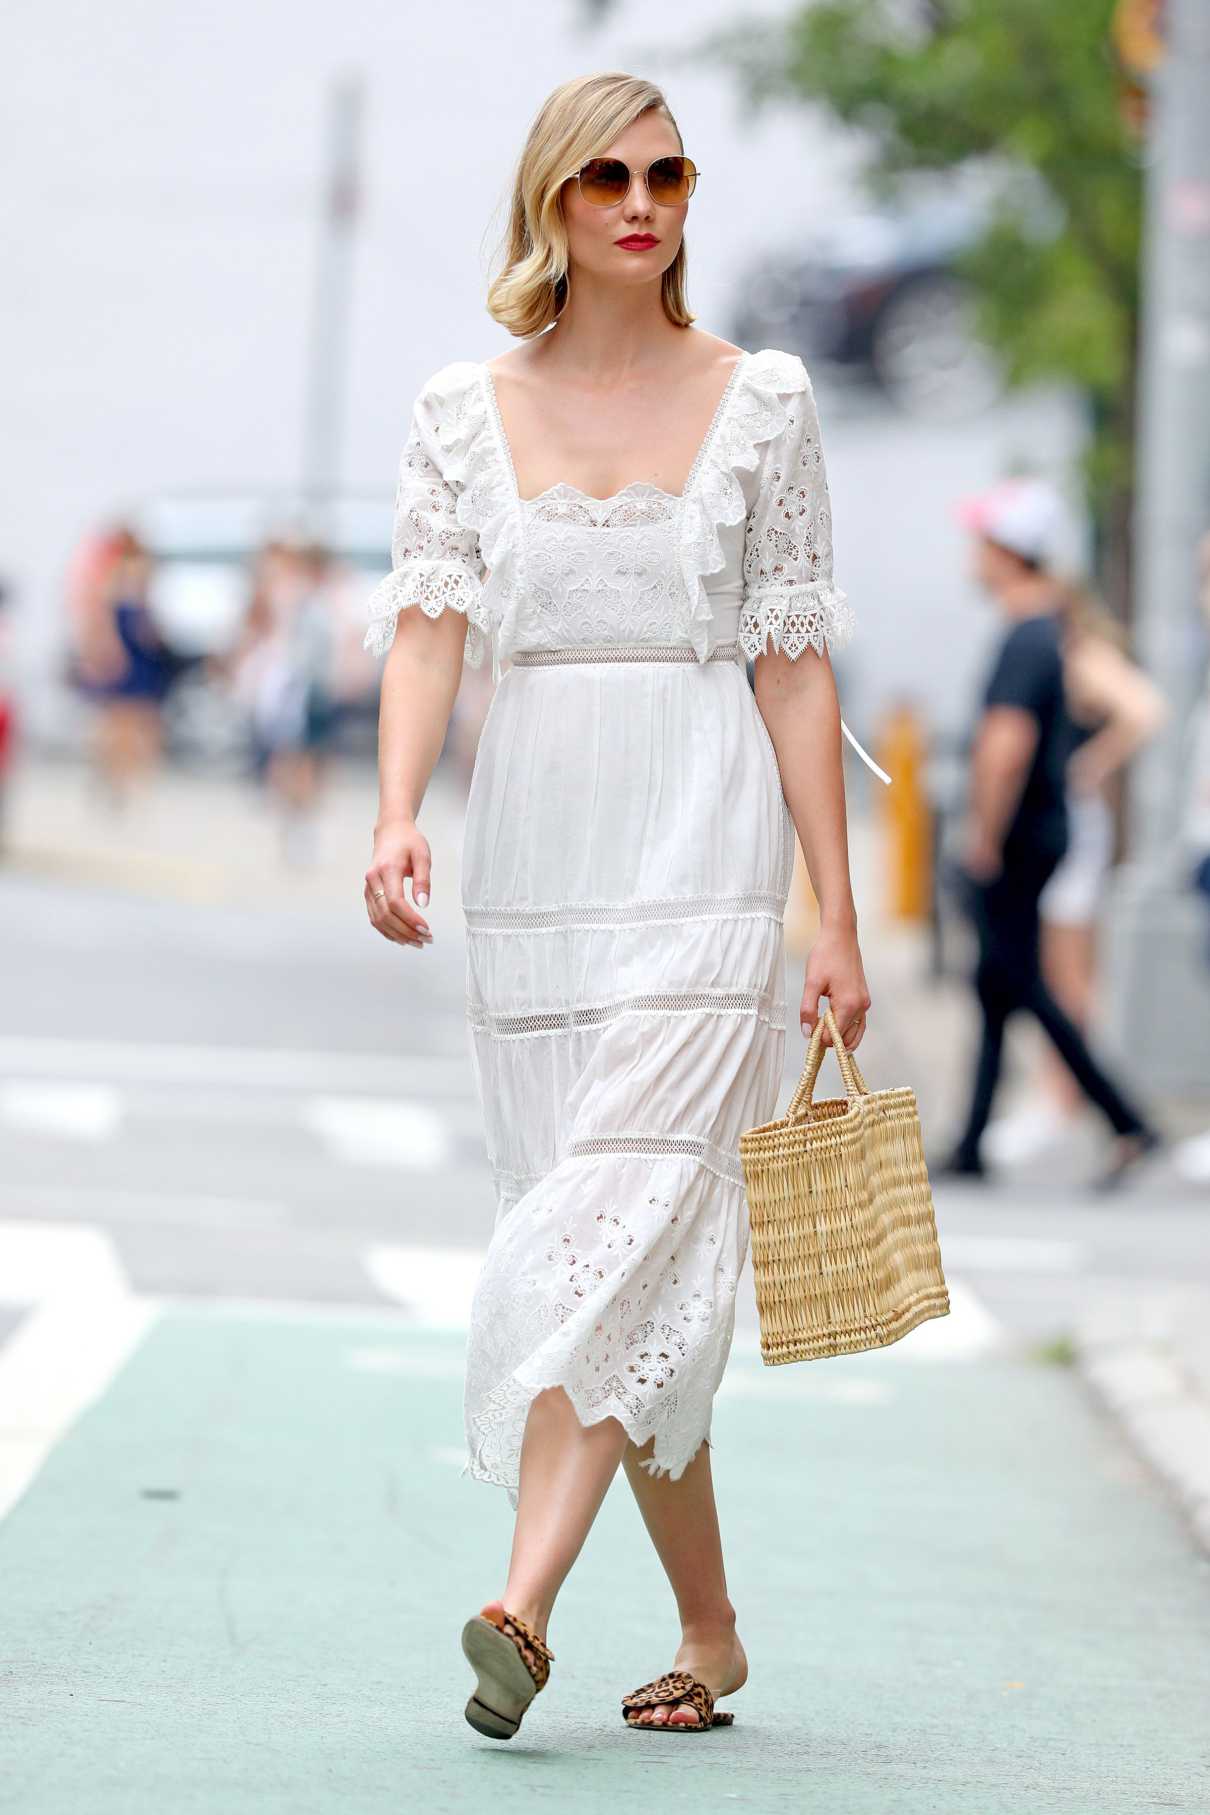 Karlie Kloss in a White Summer Lace Dress Was Seen Out in NYC 06/16 ...